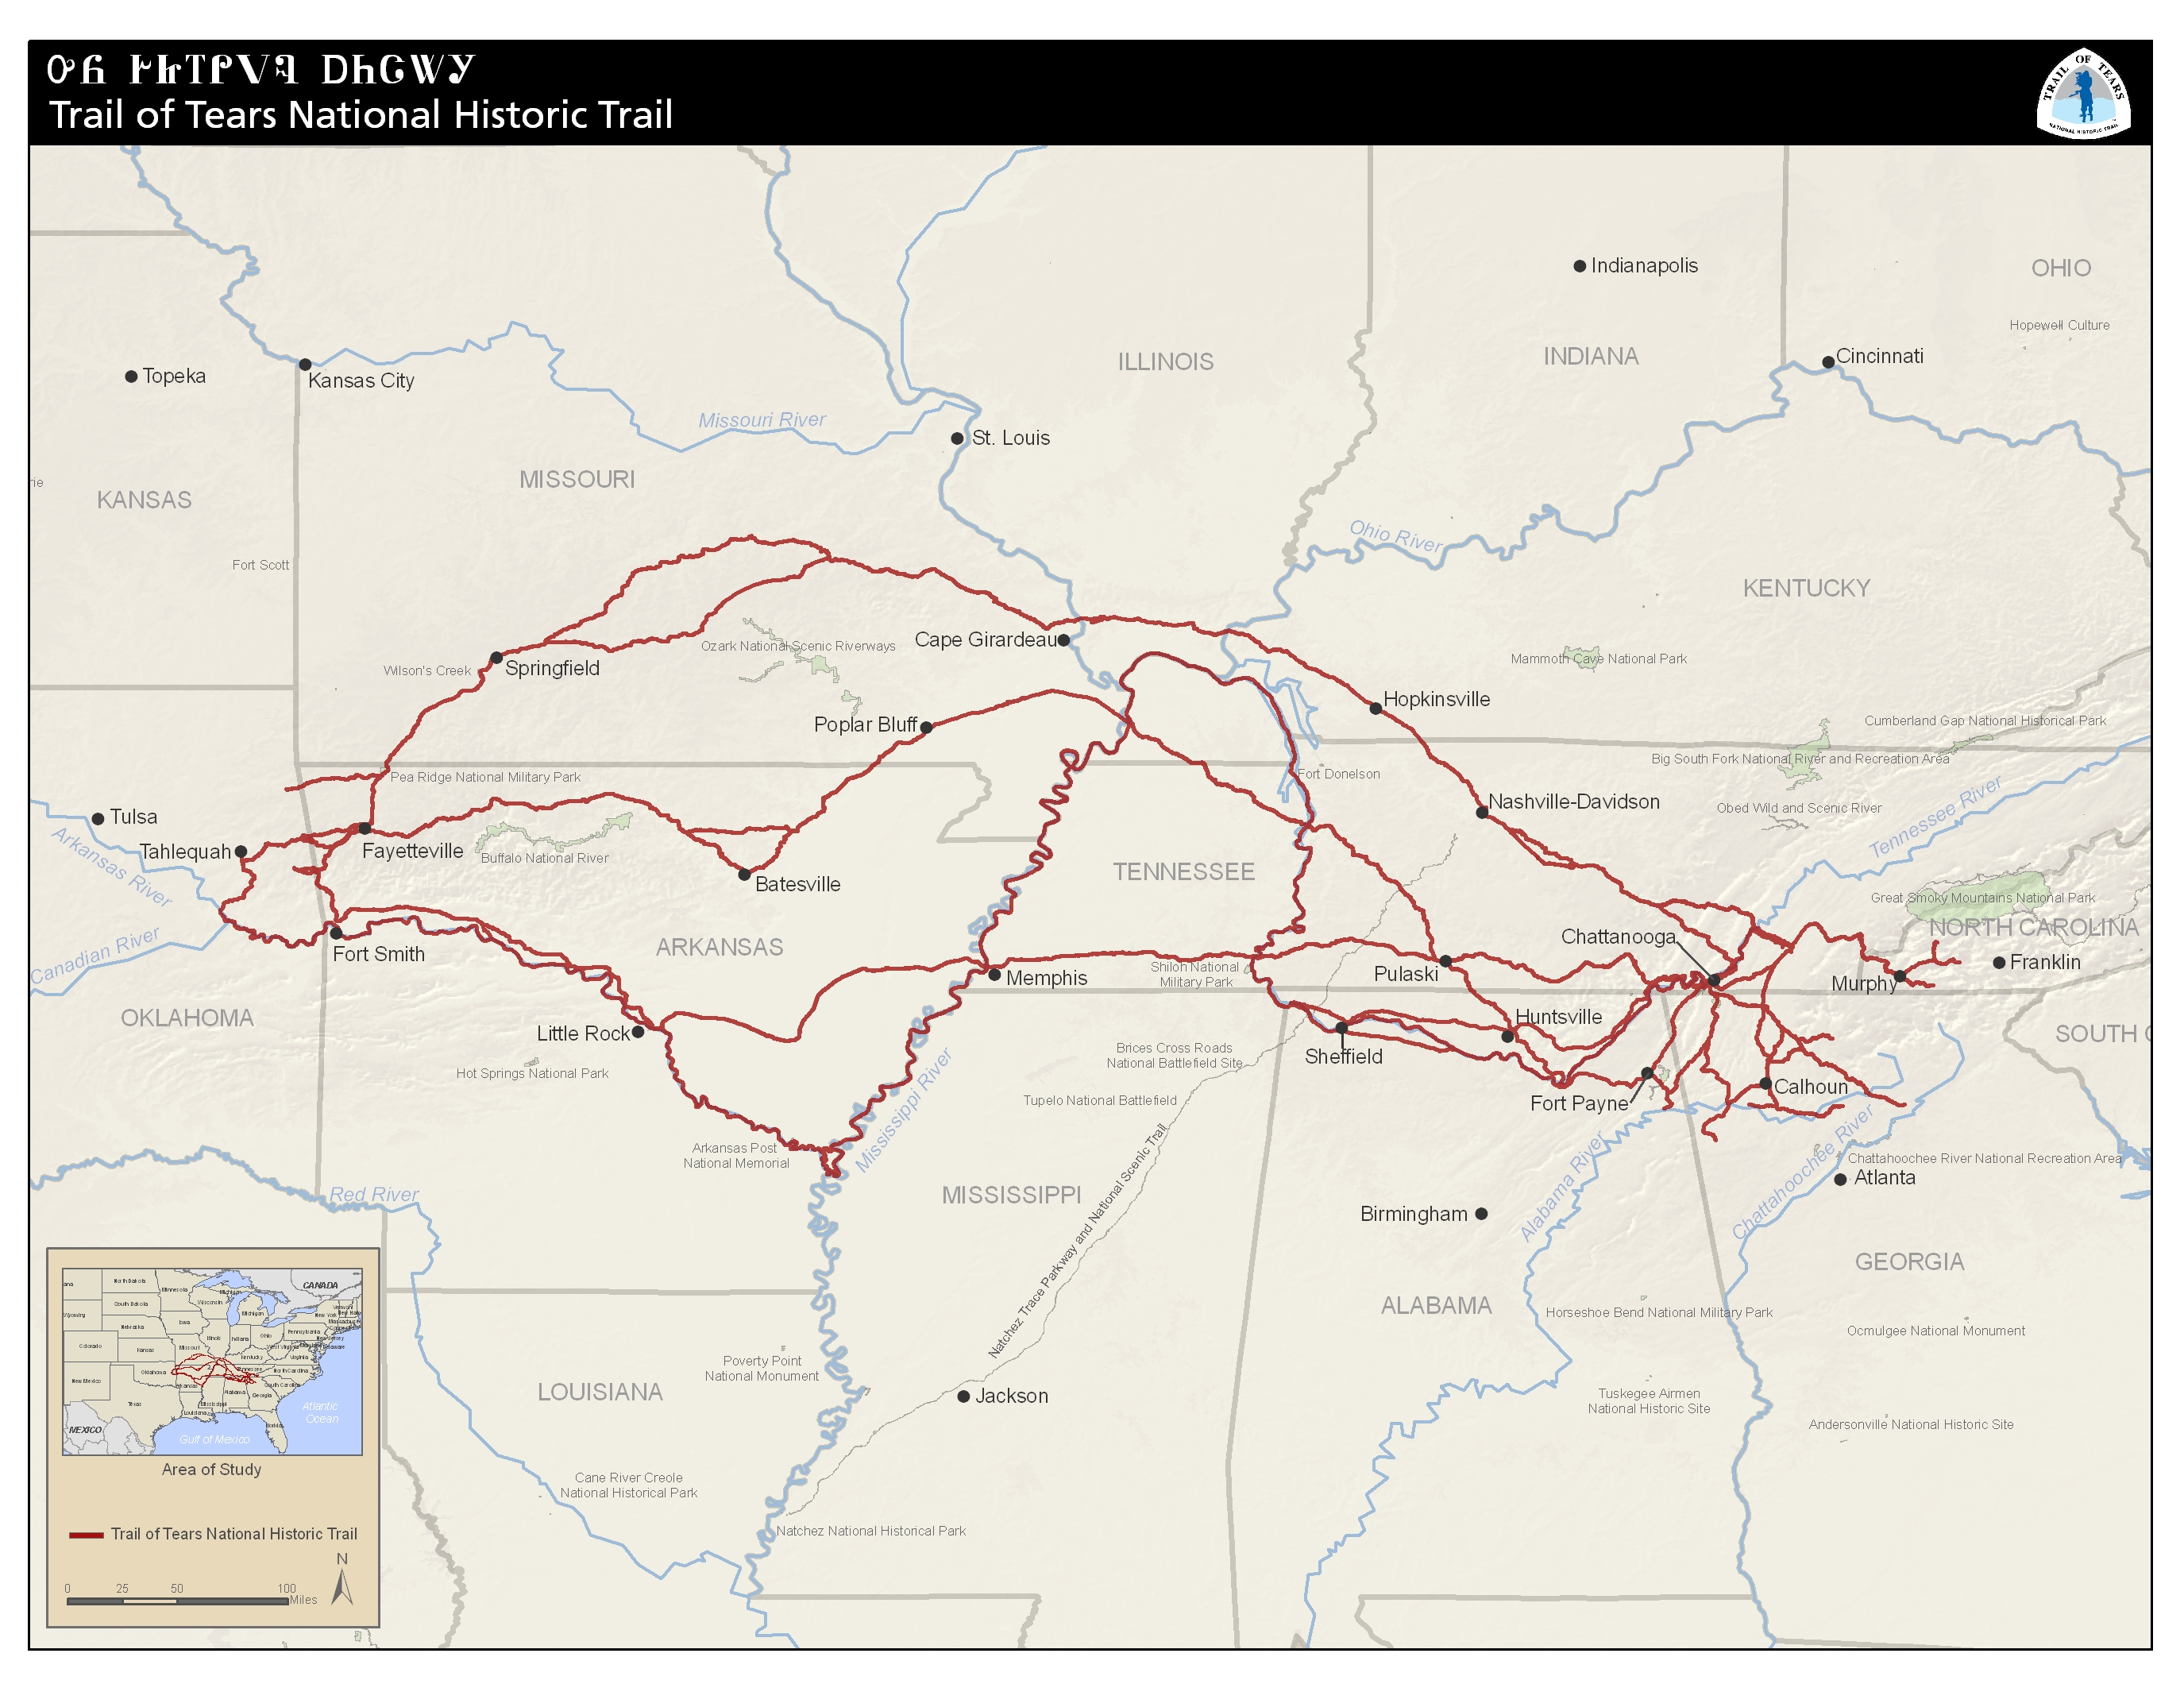 Map of the Trail of Tears - Map courtesy National Park Service